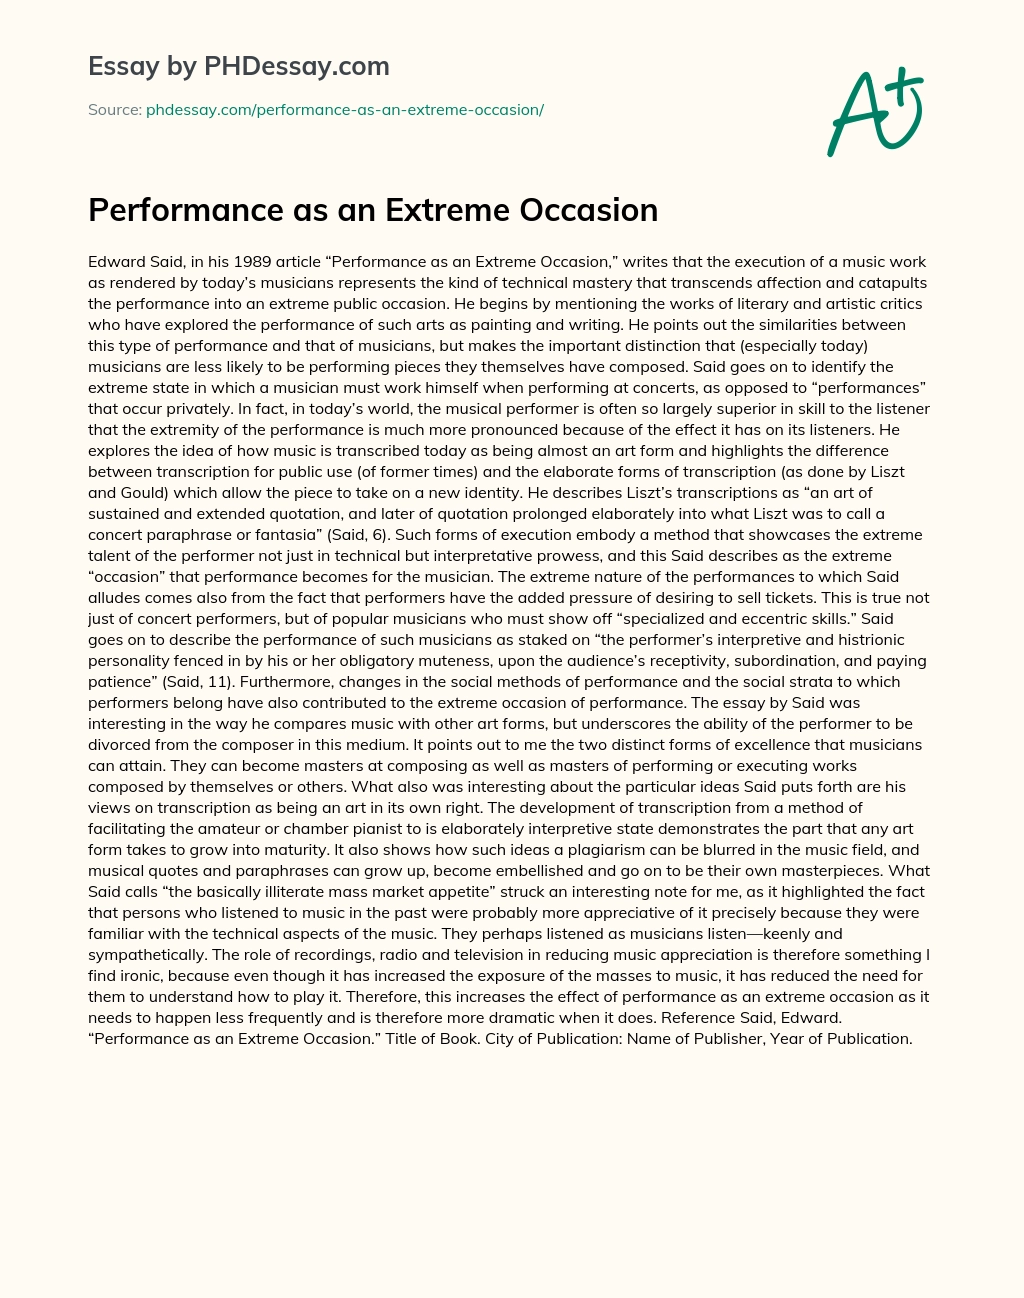 Performance as an Extreme Occasion essay